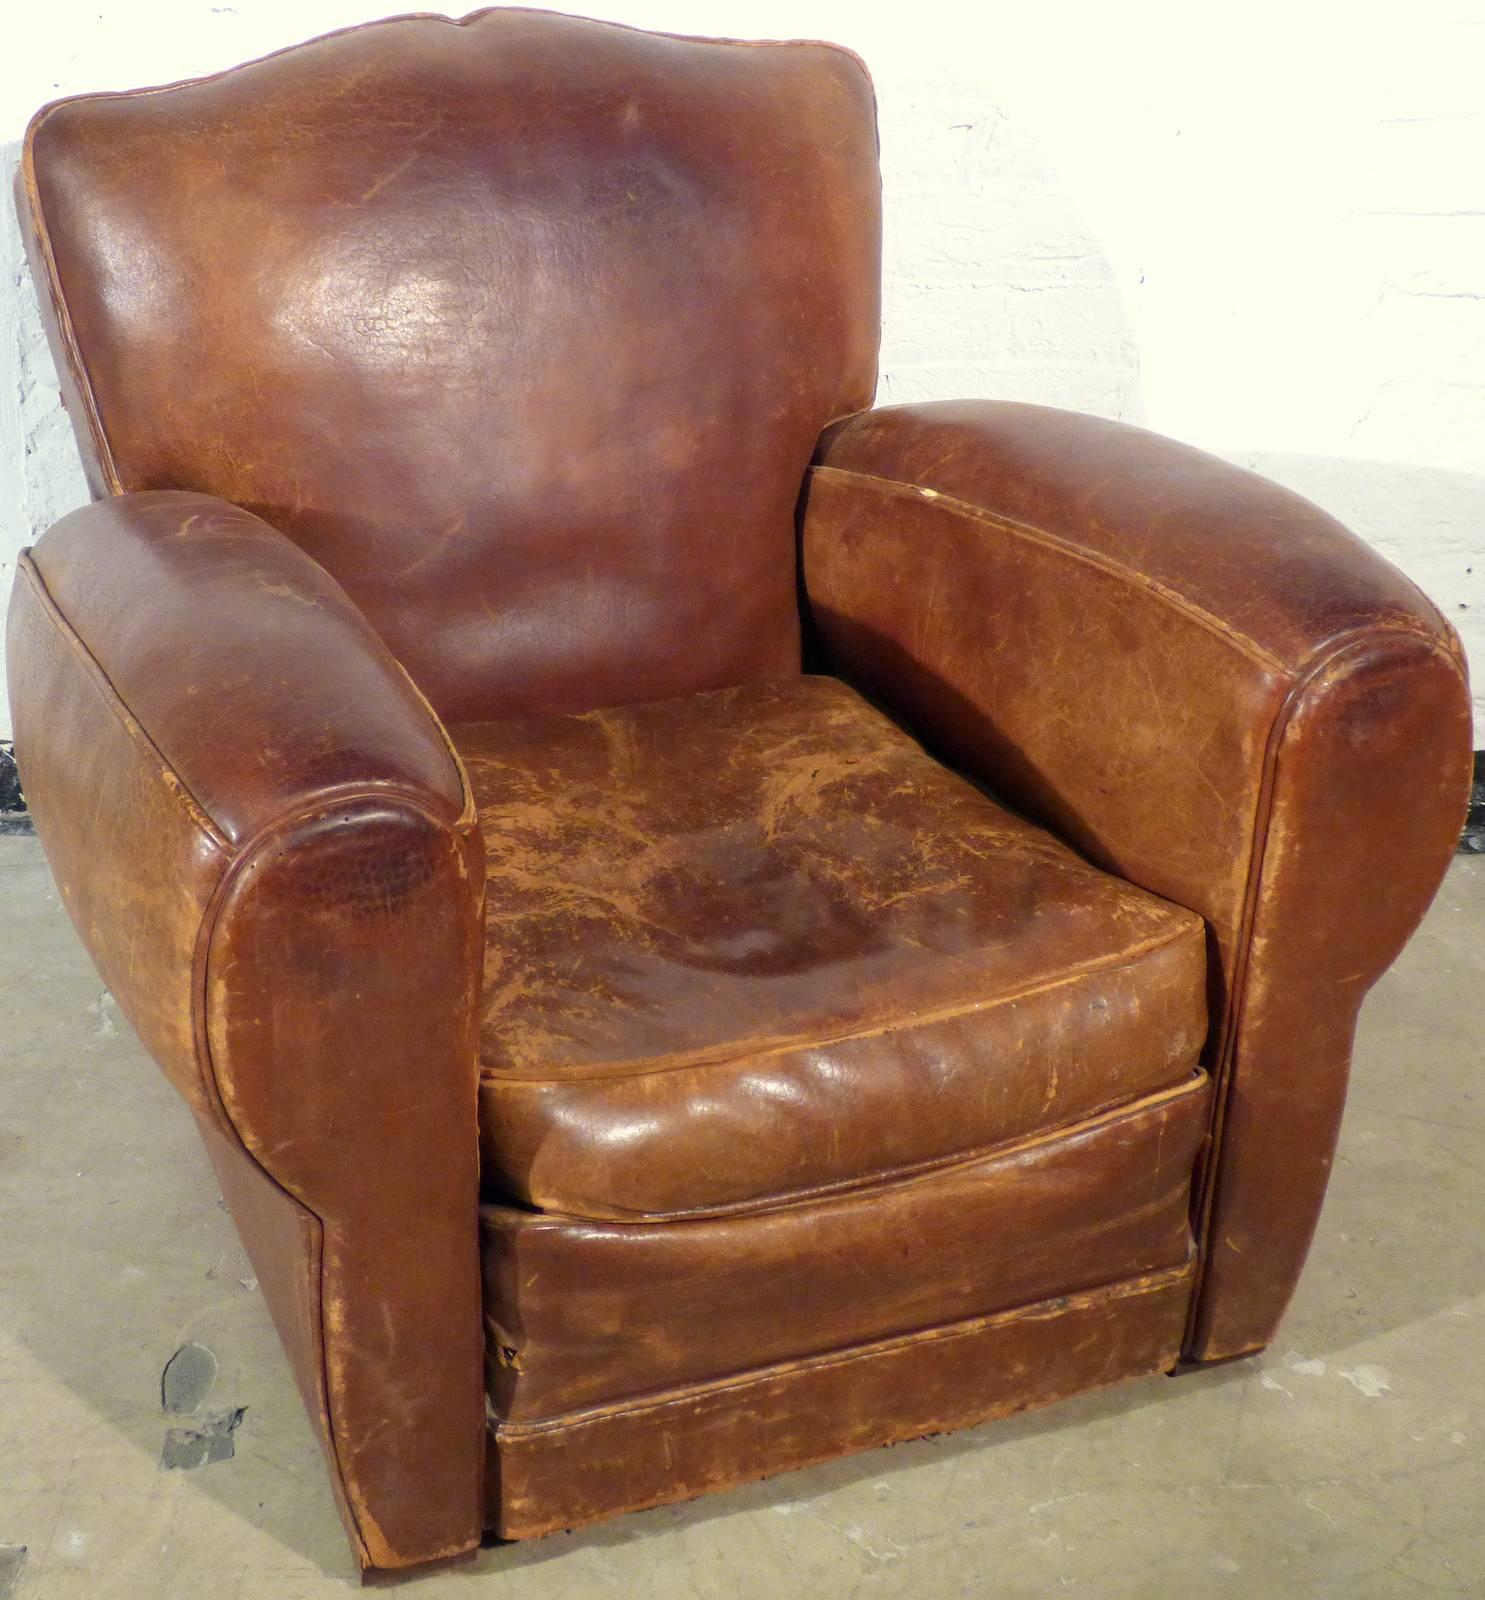 Original club chair from France in good vintage condition. The leather is bold and not porous. All in all, a fantastic patina. 
The seating pad has small (2-3cm) scratch, which can be fixed upon request. We didn't fix it yet due to the individual